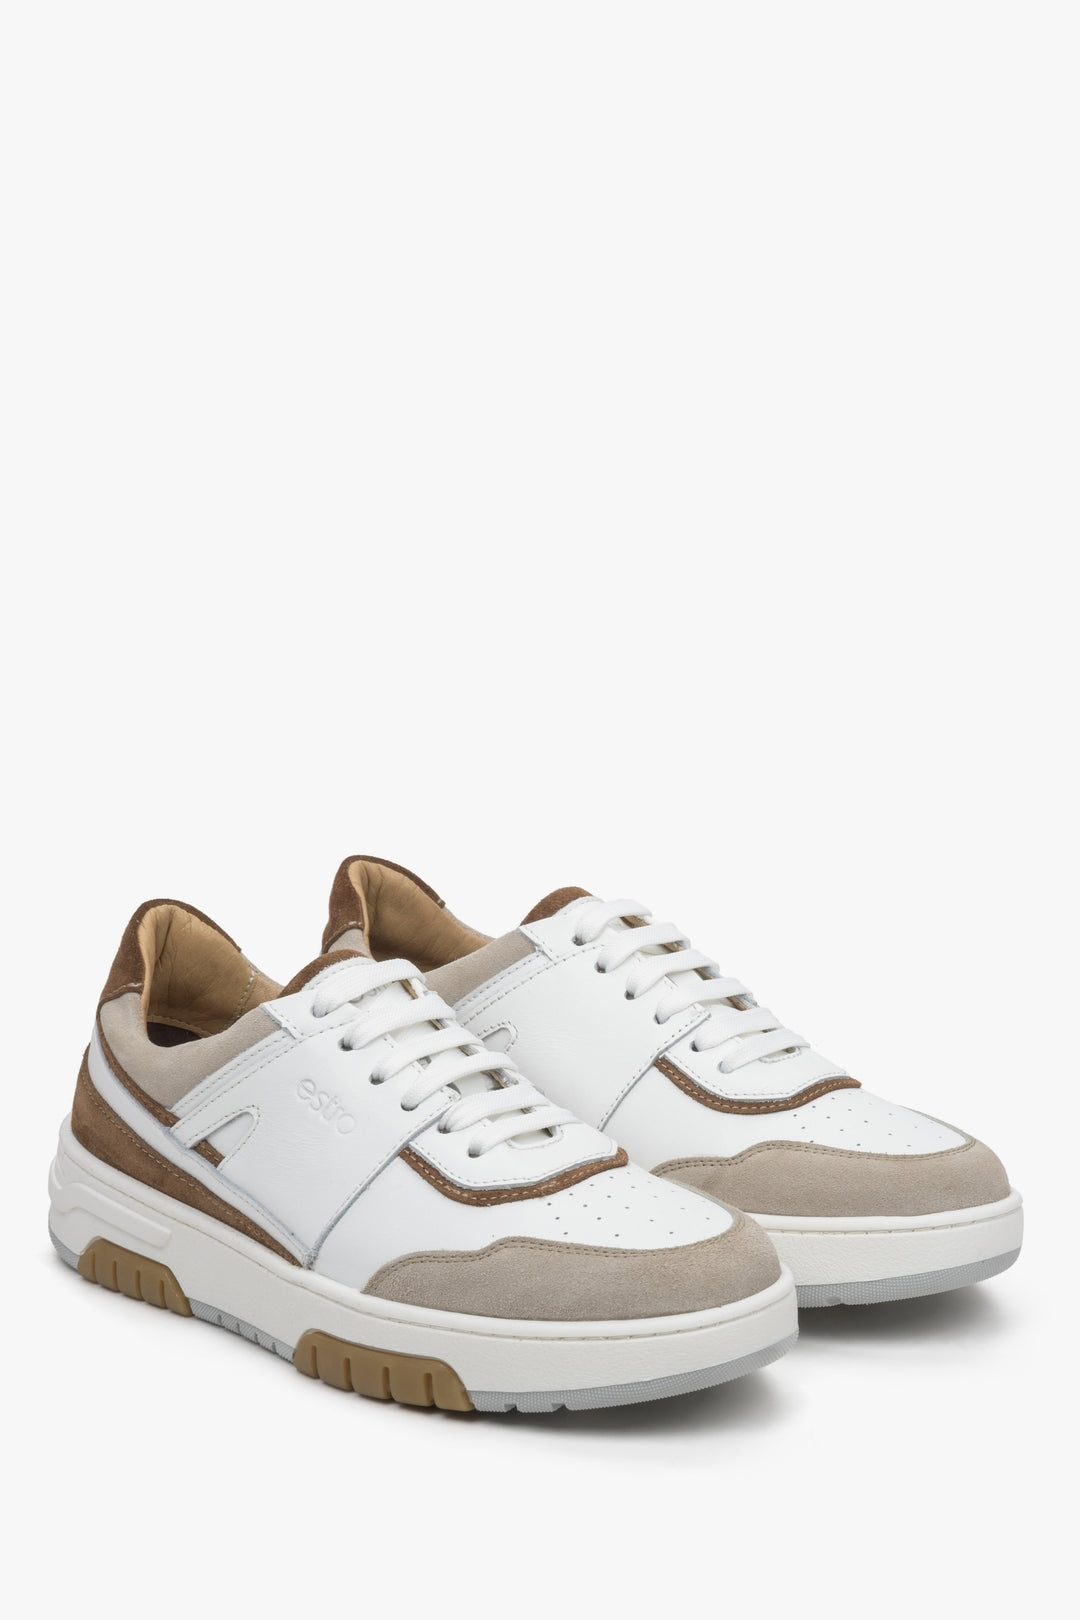 Women's beige and white sneakers by Estro.